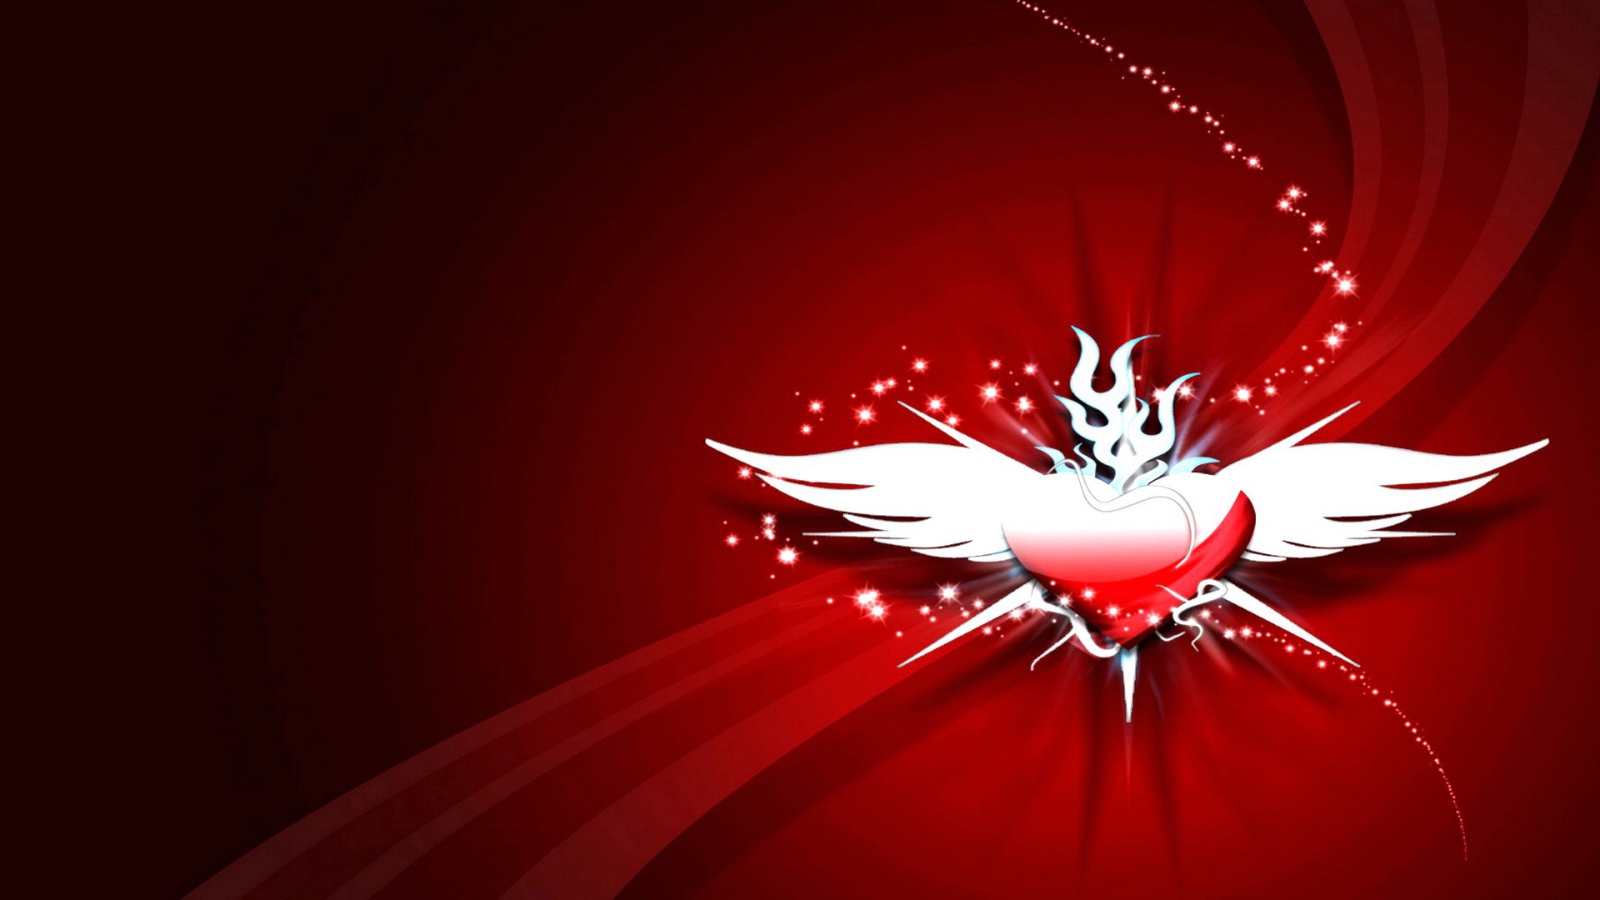 Free download heart with wings on a red background Desktop wallpaper 1600x900 [1600x900] for your Desktop, Mobile & Tablet. Explore Pink Heart with Wings Wallpaper. Angel Wing Wallpaper